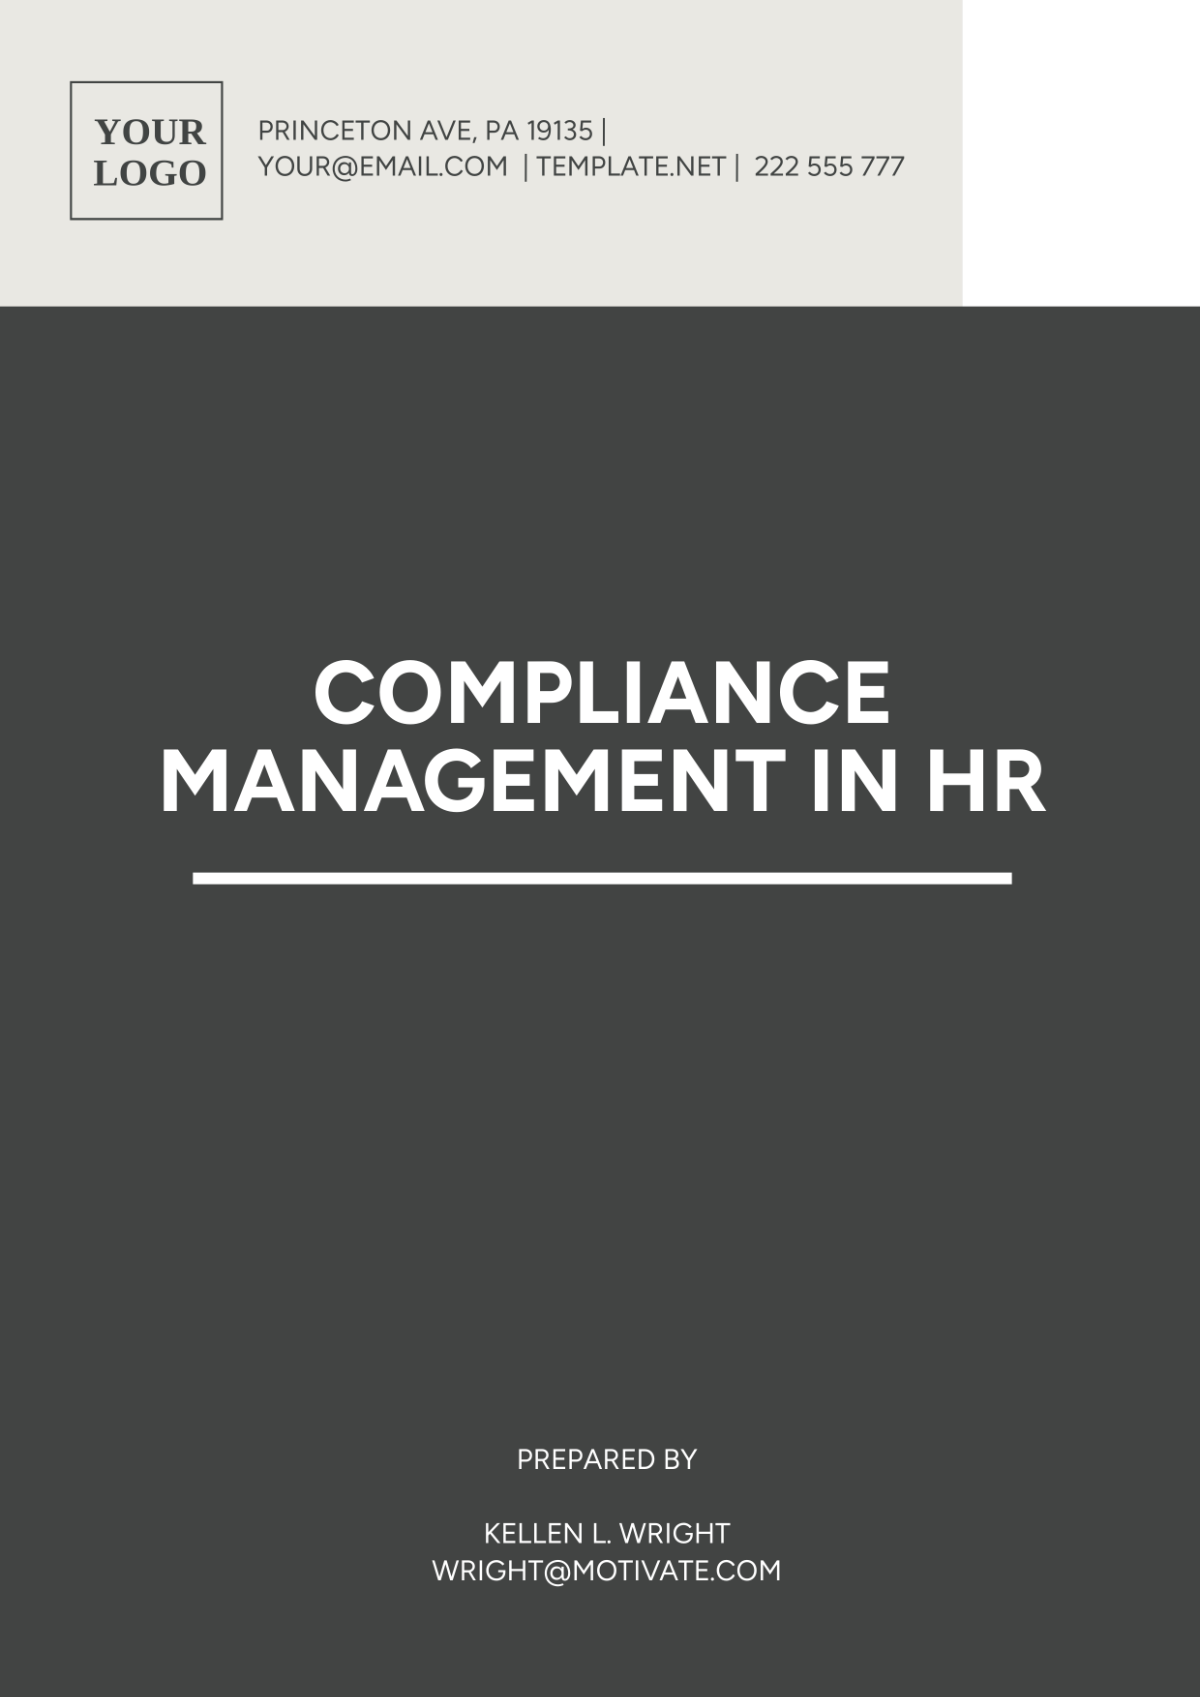 Compliance Management In HR Template